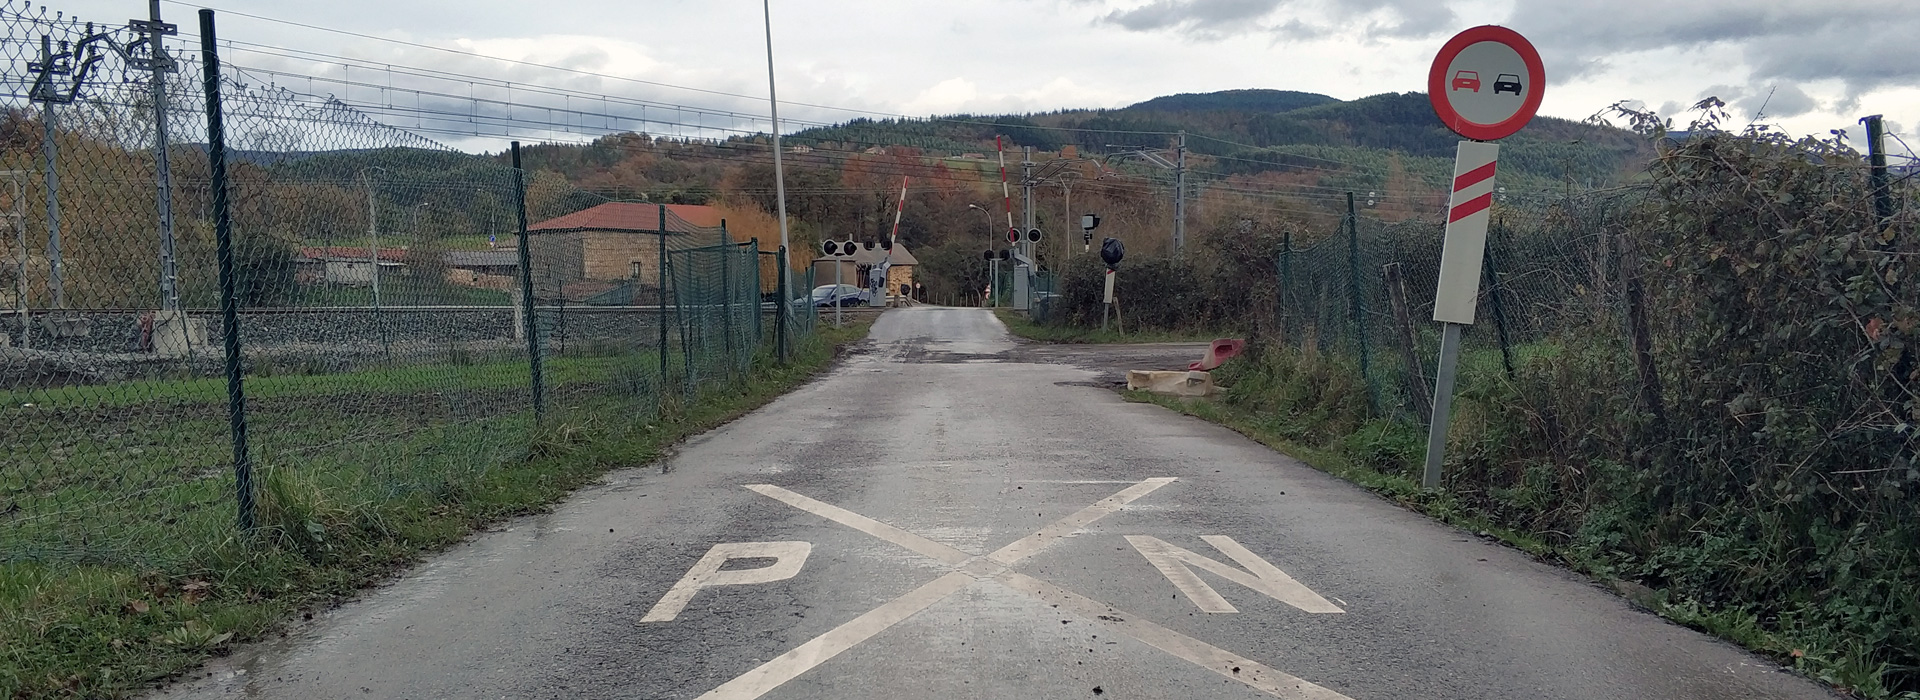 SUPPRESSION OF LEVEL CROSSINGS IN THE BASQUE COUNTRY NETWORK - 3